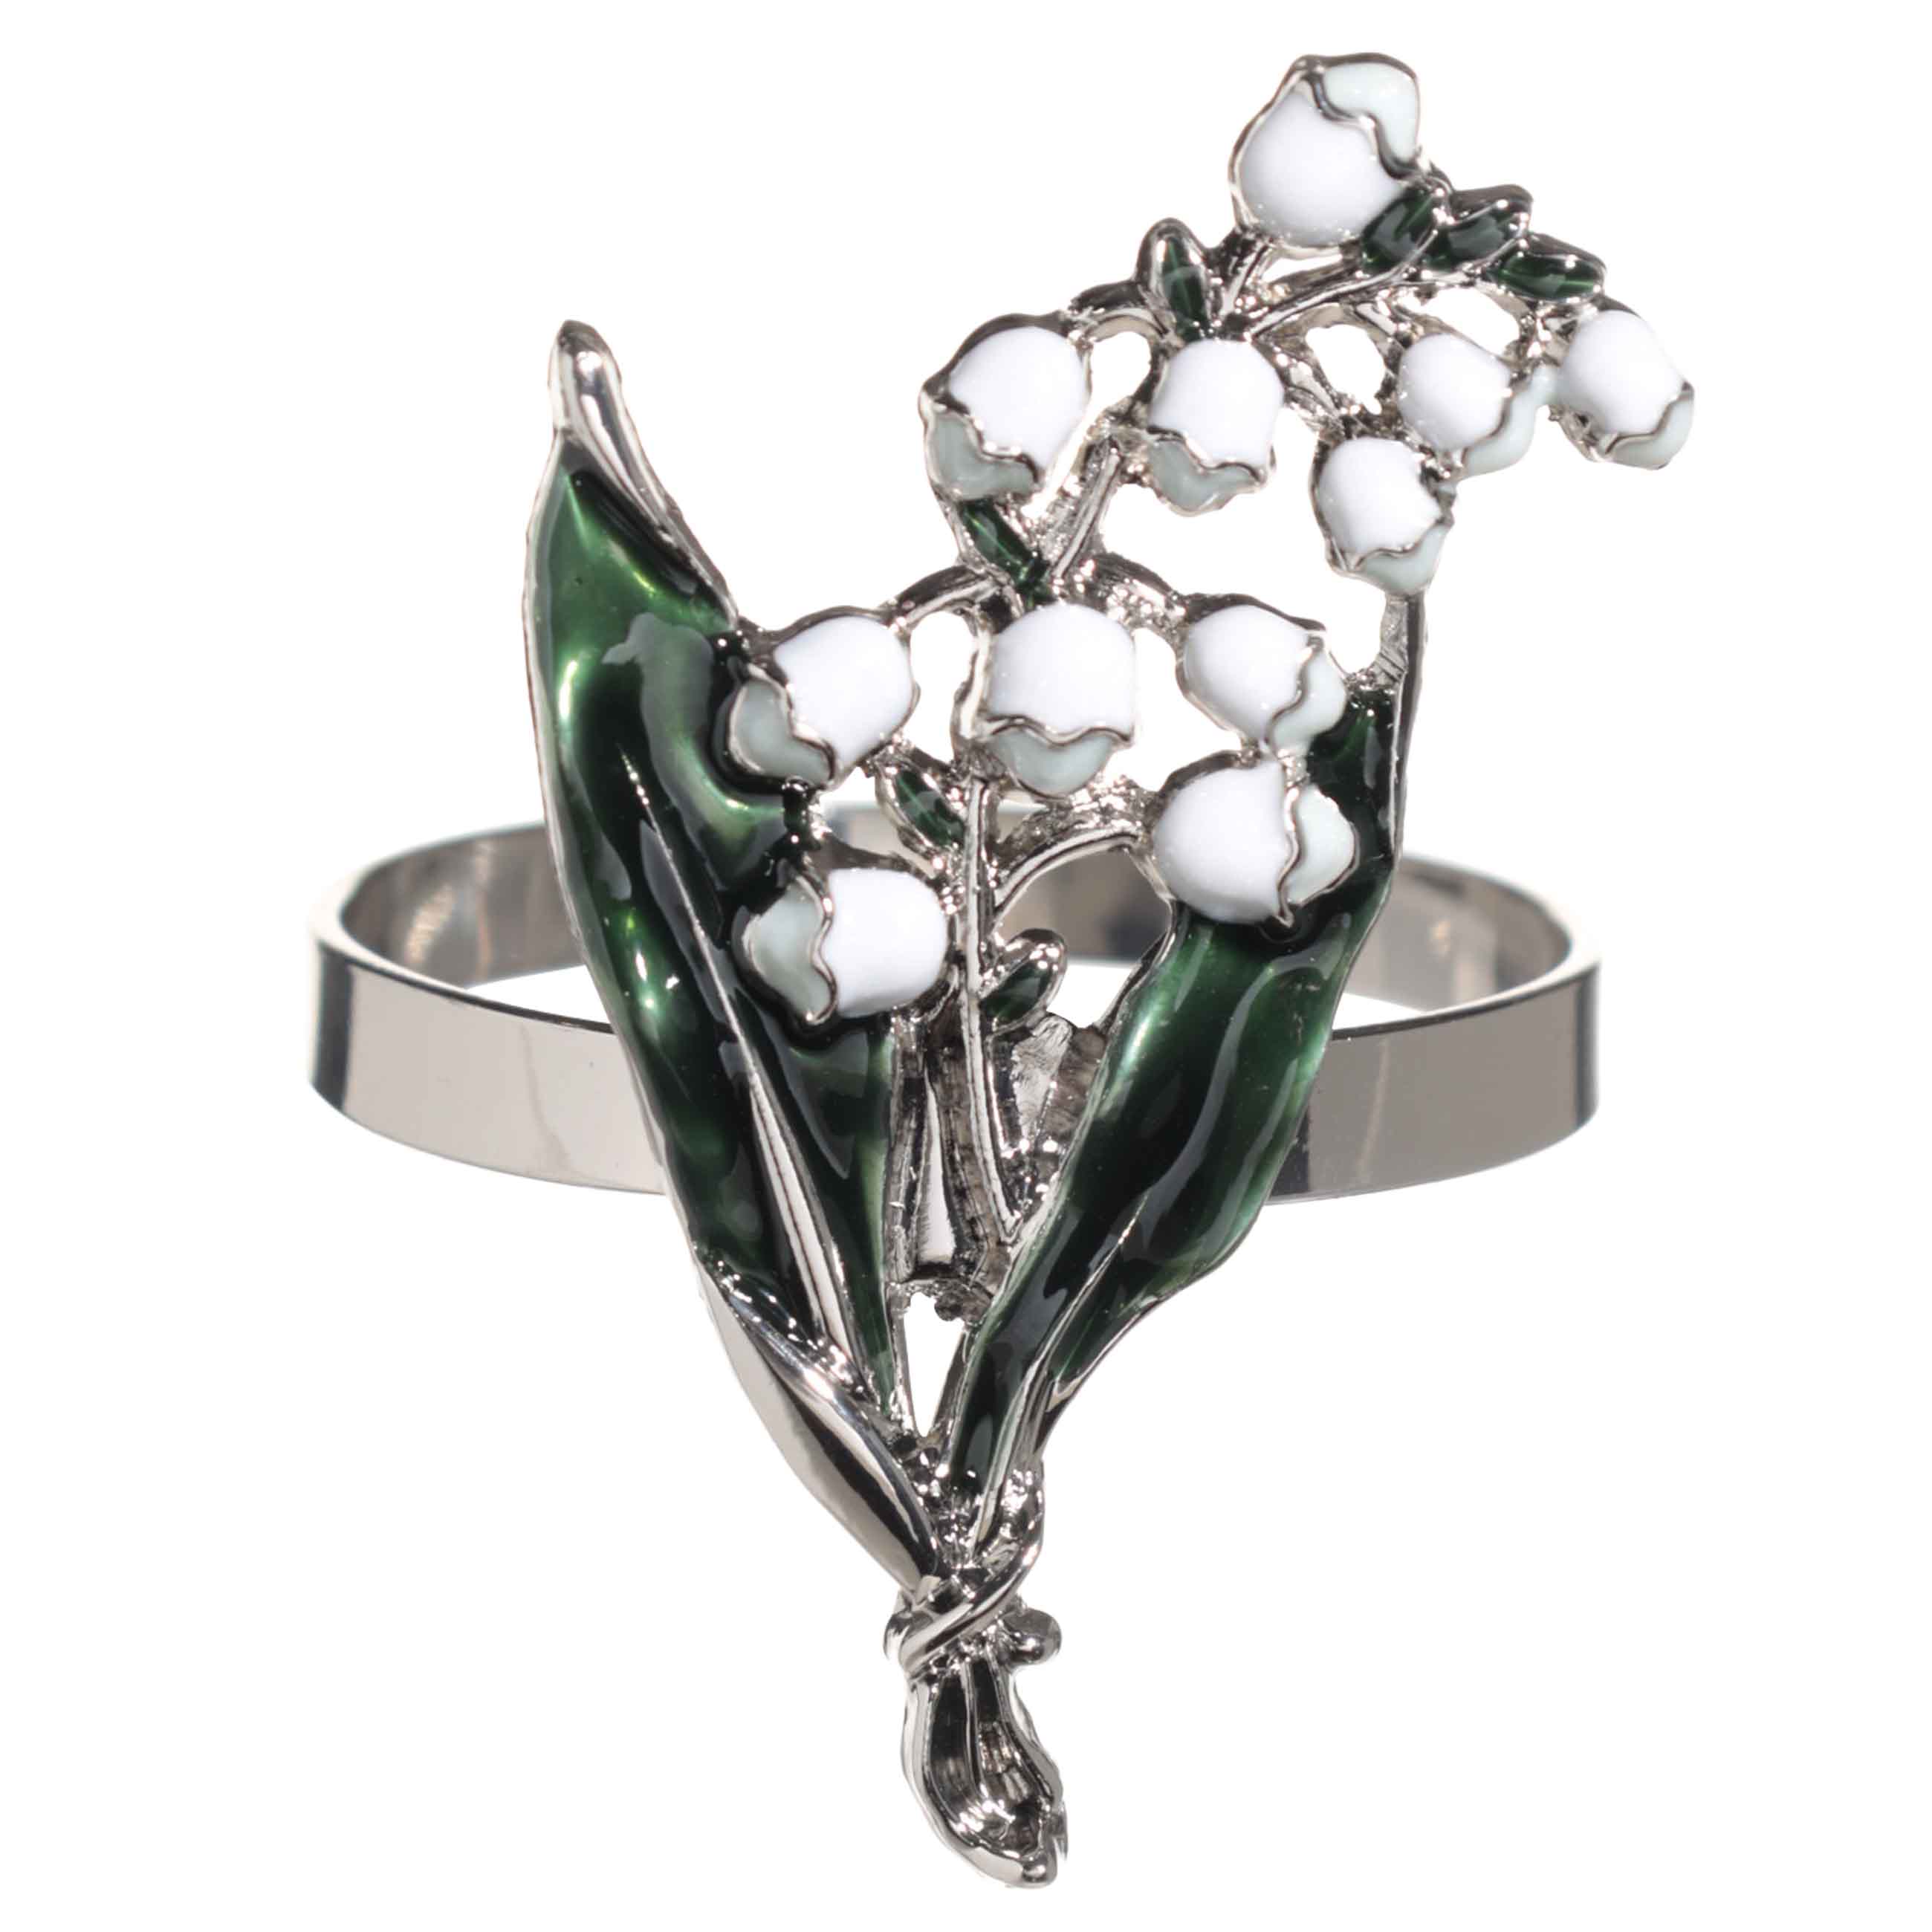 Napkin ring, 5 cm, metal, green-gold, Lily of the valley with leaves, May-lily изображение № 2